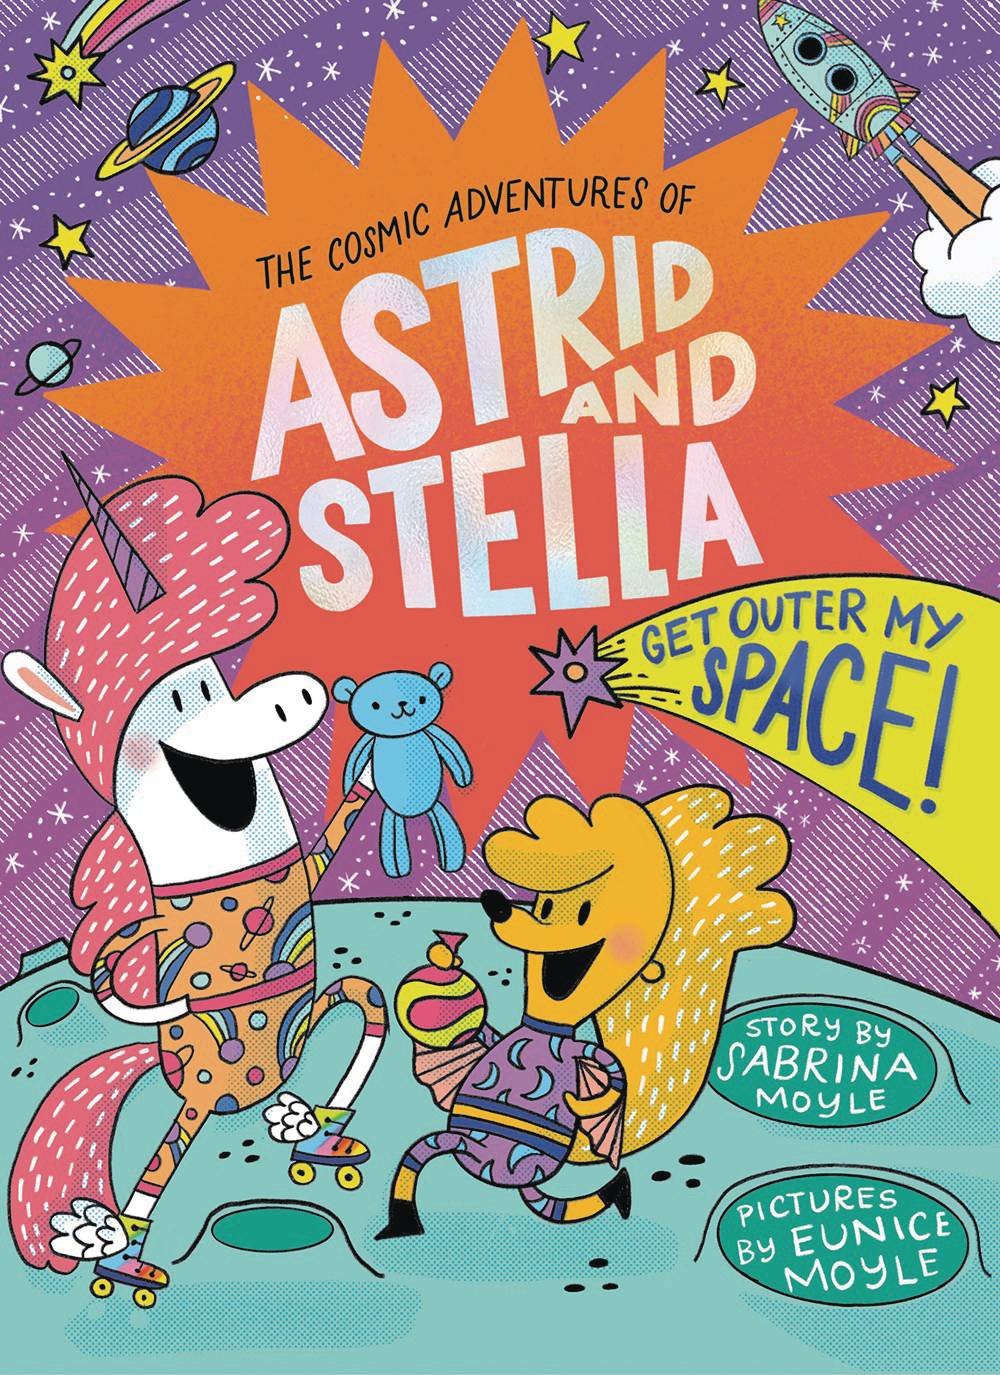 COSMIC ADV OF ASTRID & STELLA TP GET OUTER MY SPACE